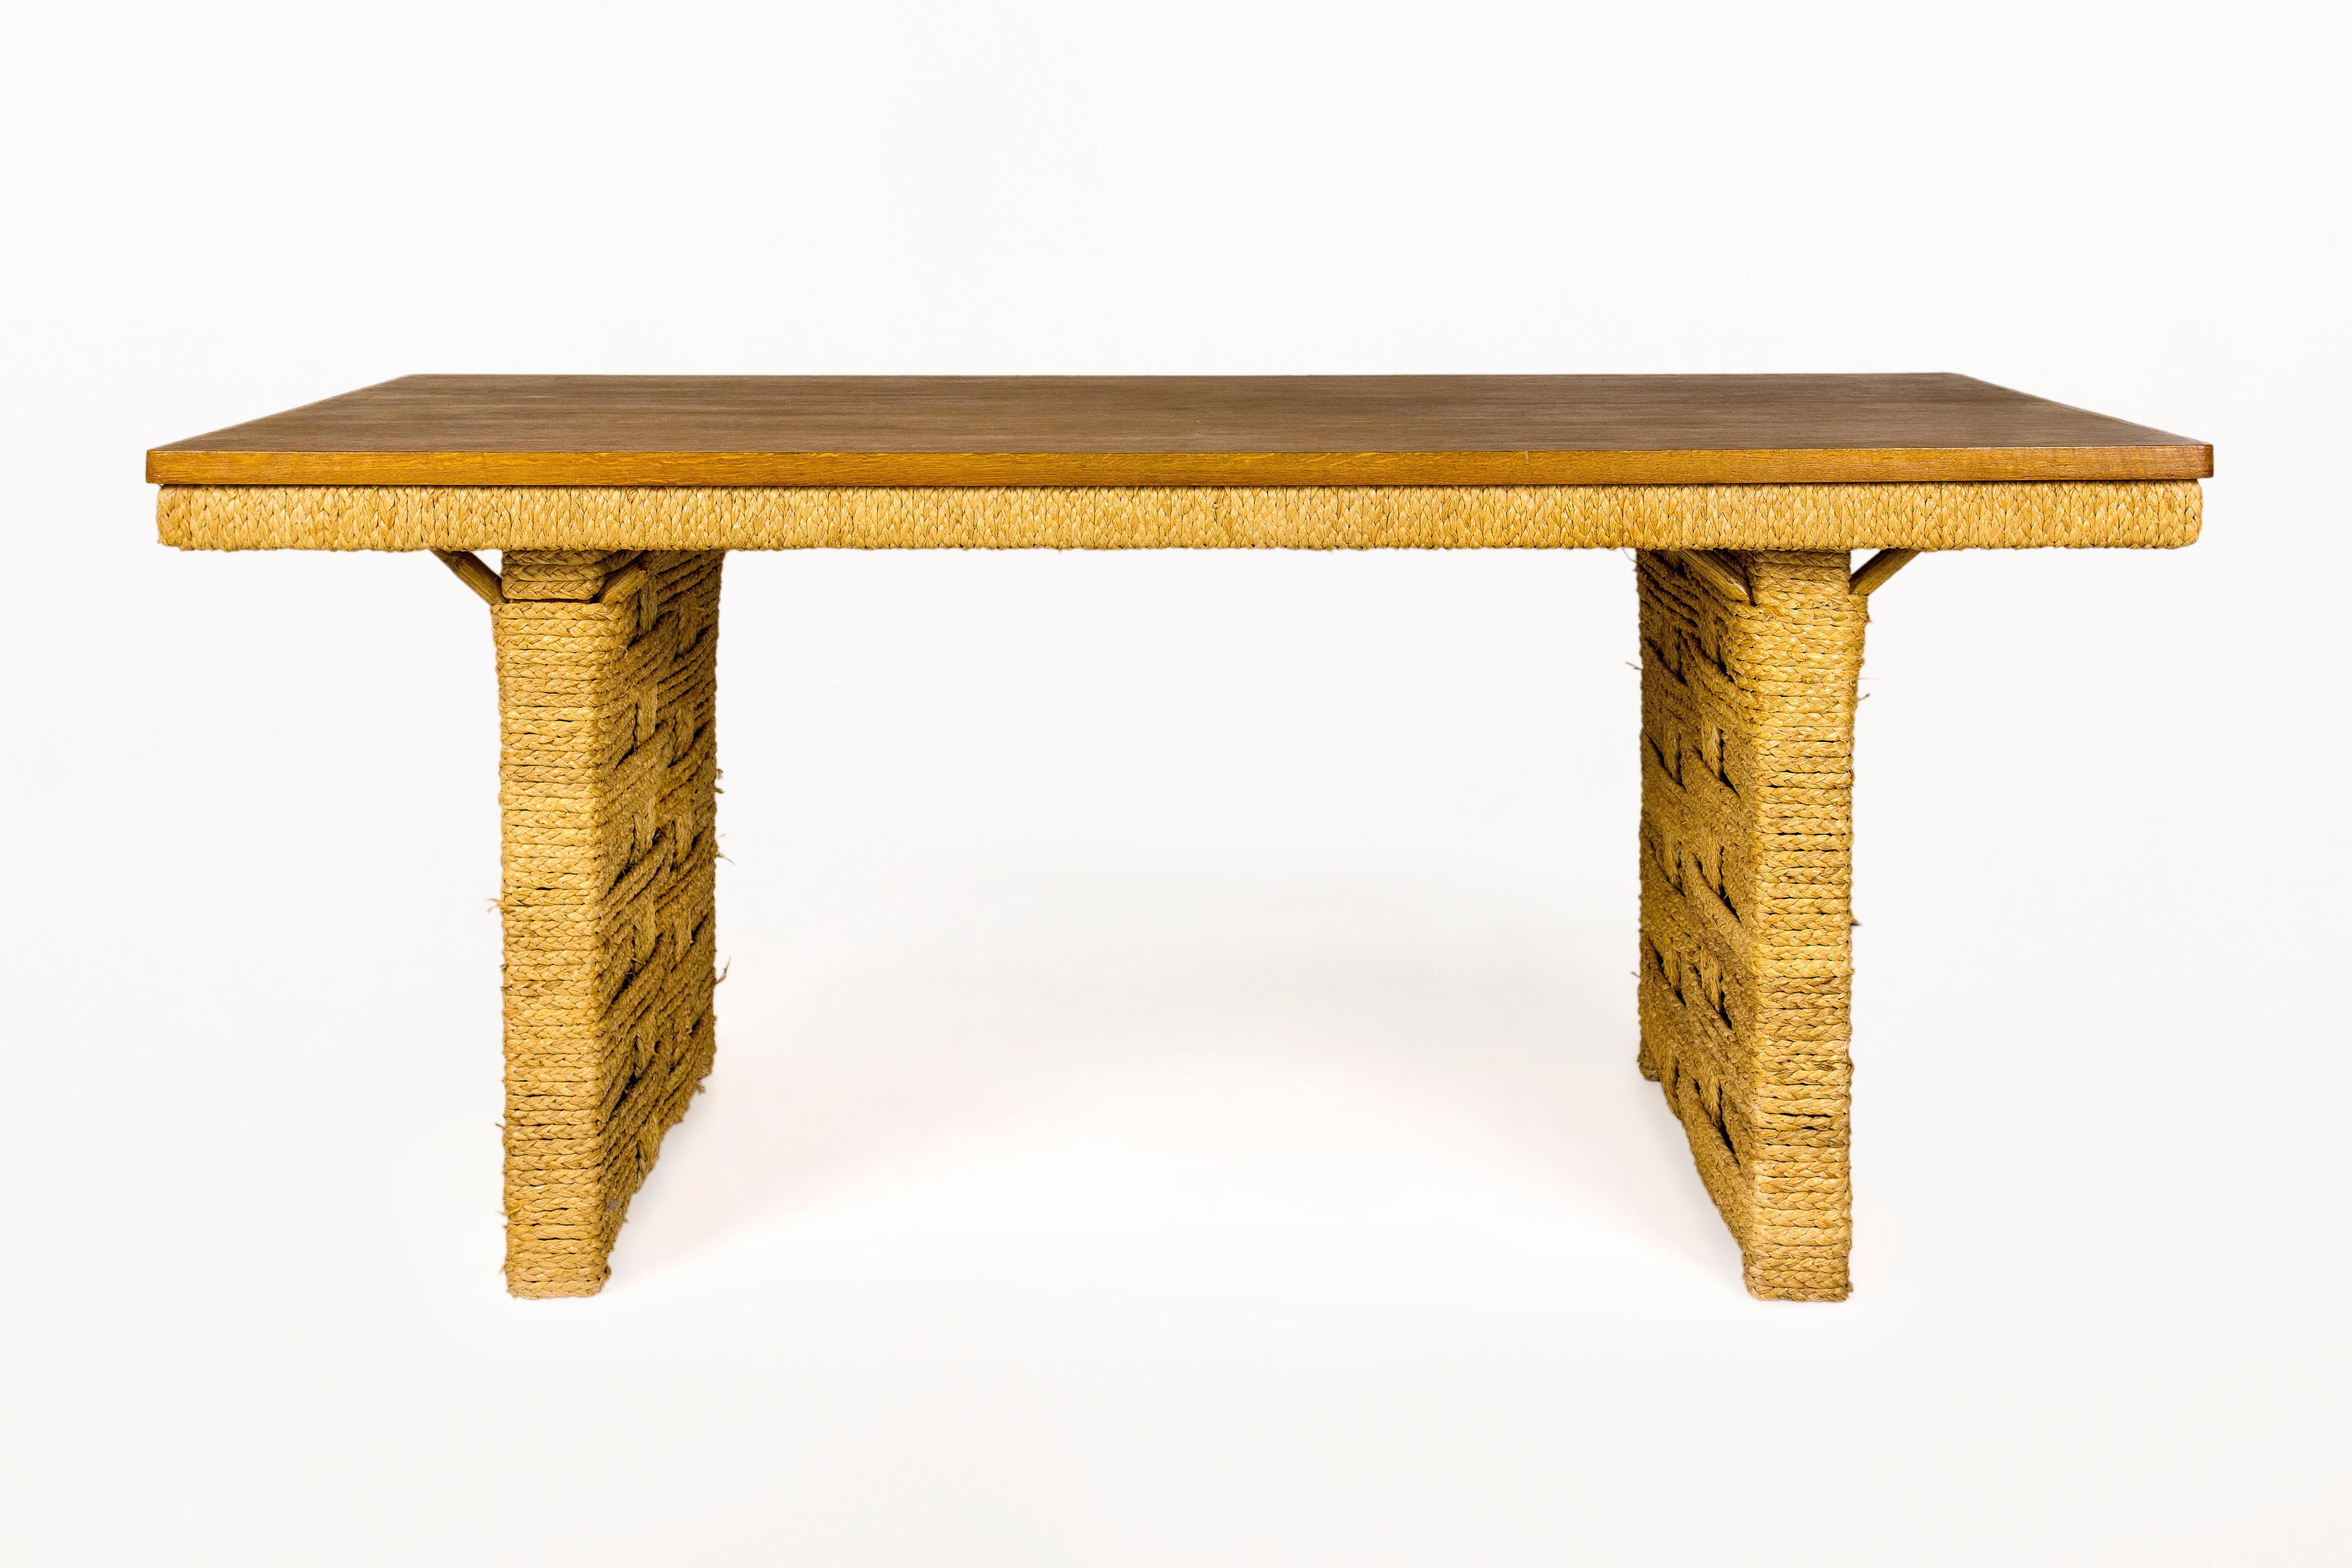 Adrien Audoux & Frida Minet Dining Table.
Rope detailing.
Oak top,
circa 1955, France.
Very good vintage condition.
Adrien Audoux and Frida Minet were a French couple and worked as designer.
During the 1940s and the 1950s, they designed